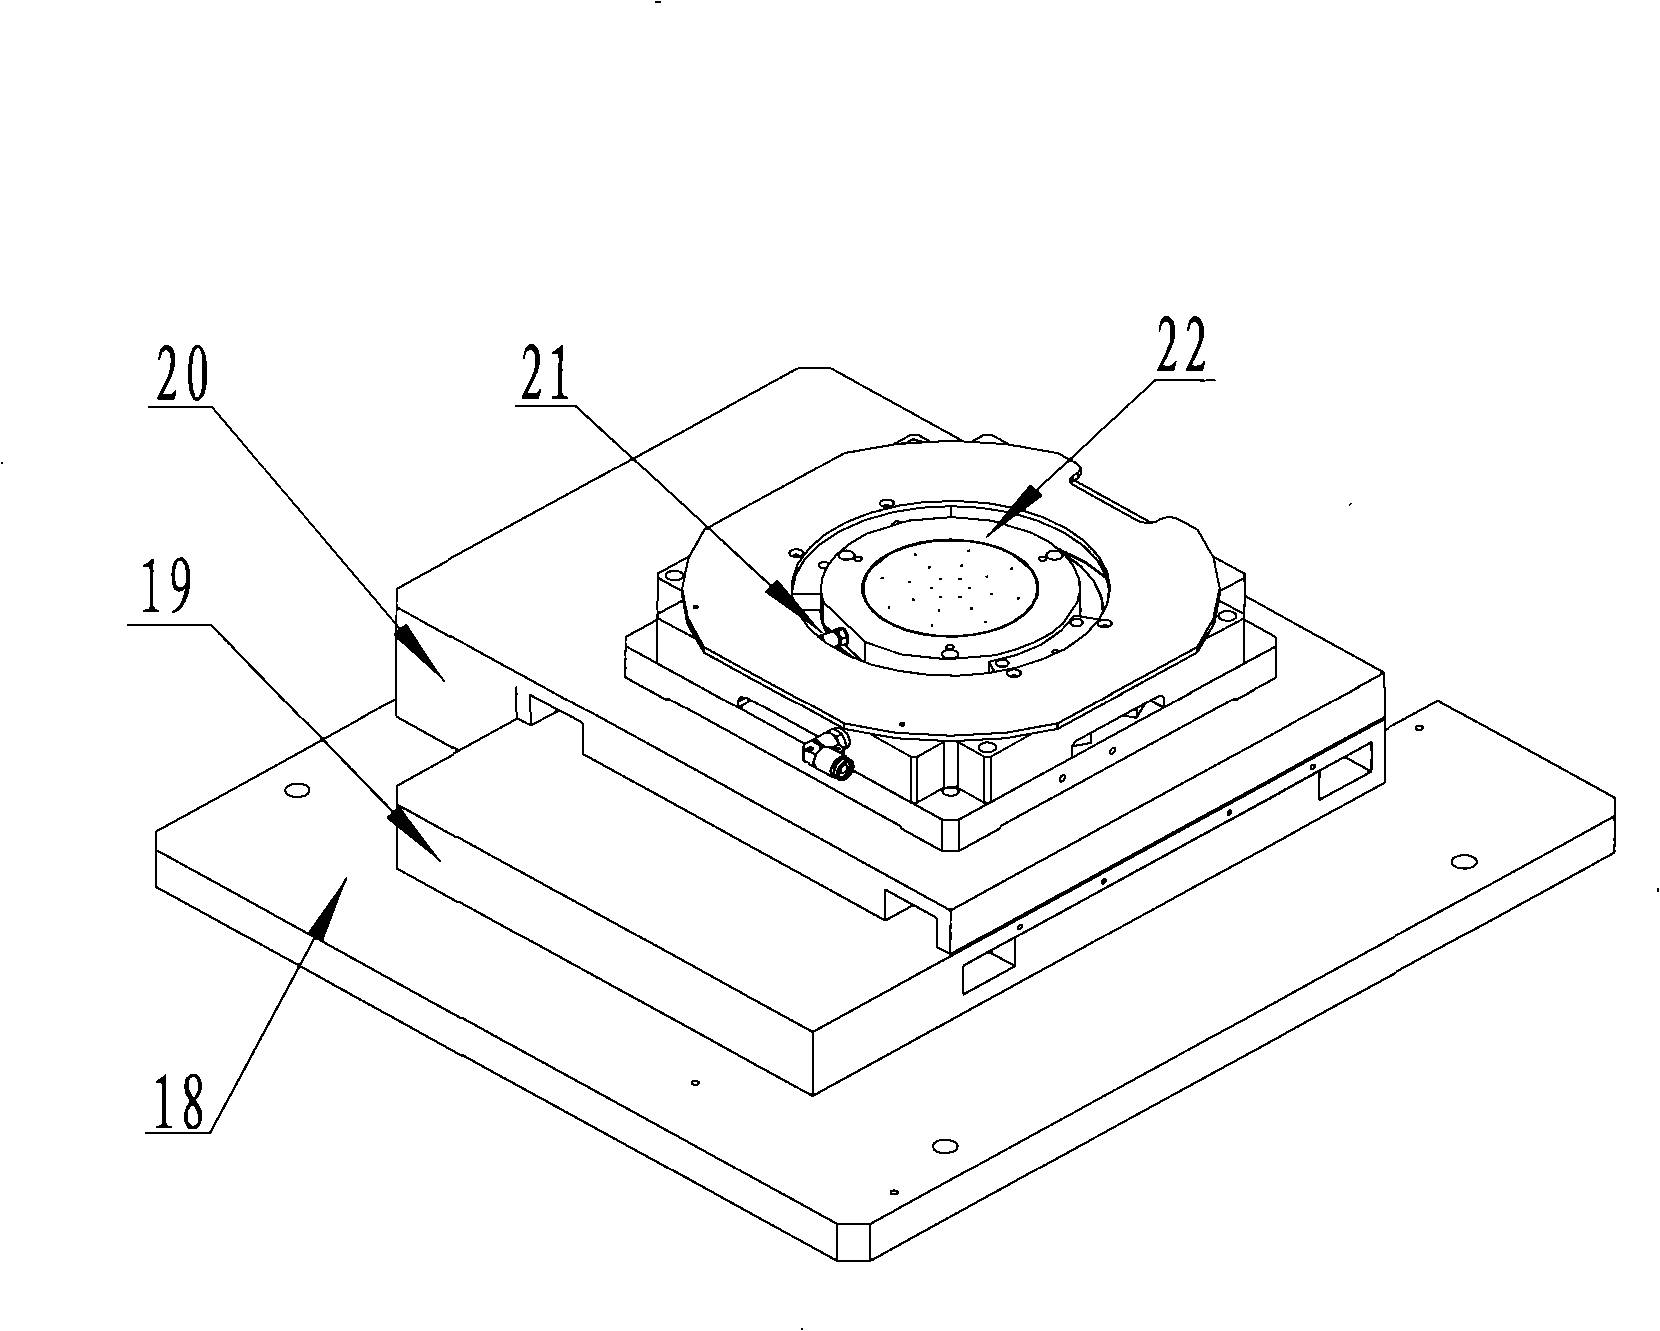 Design method for ultraviolet laser machining apparatus for cutting wafer